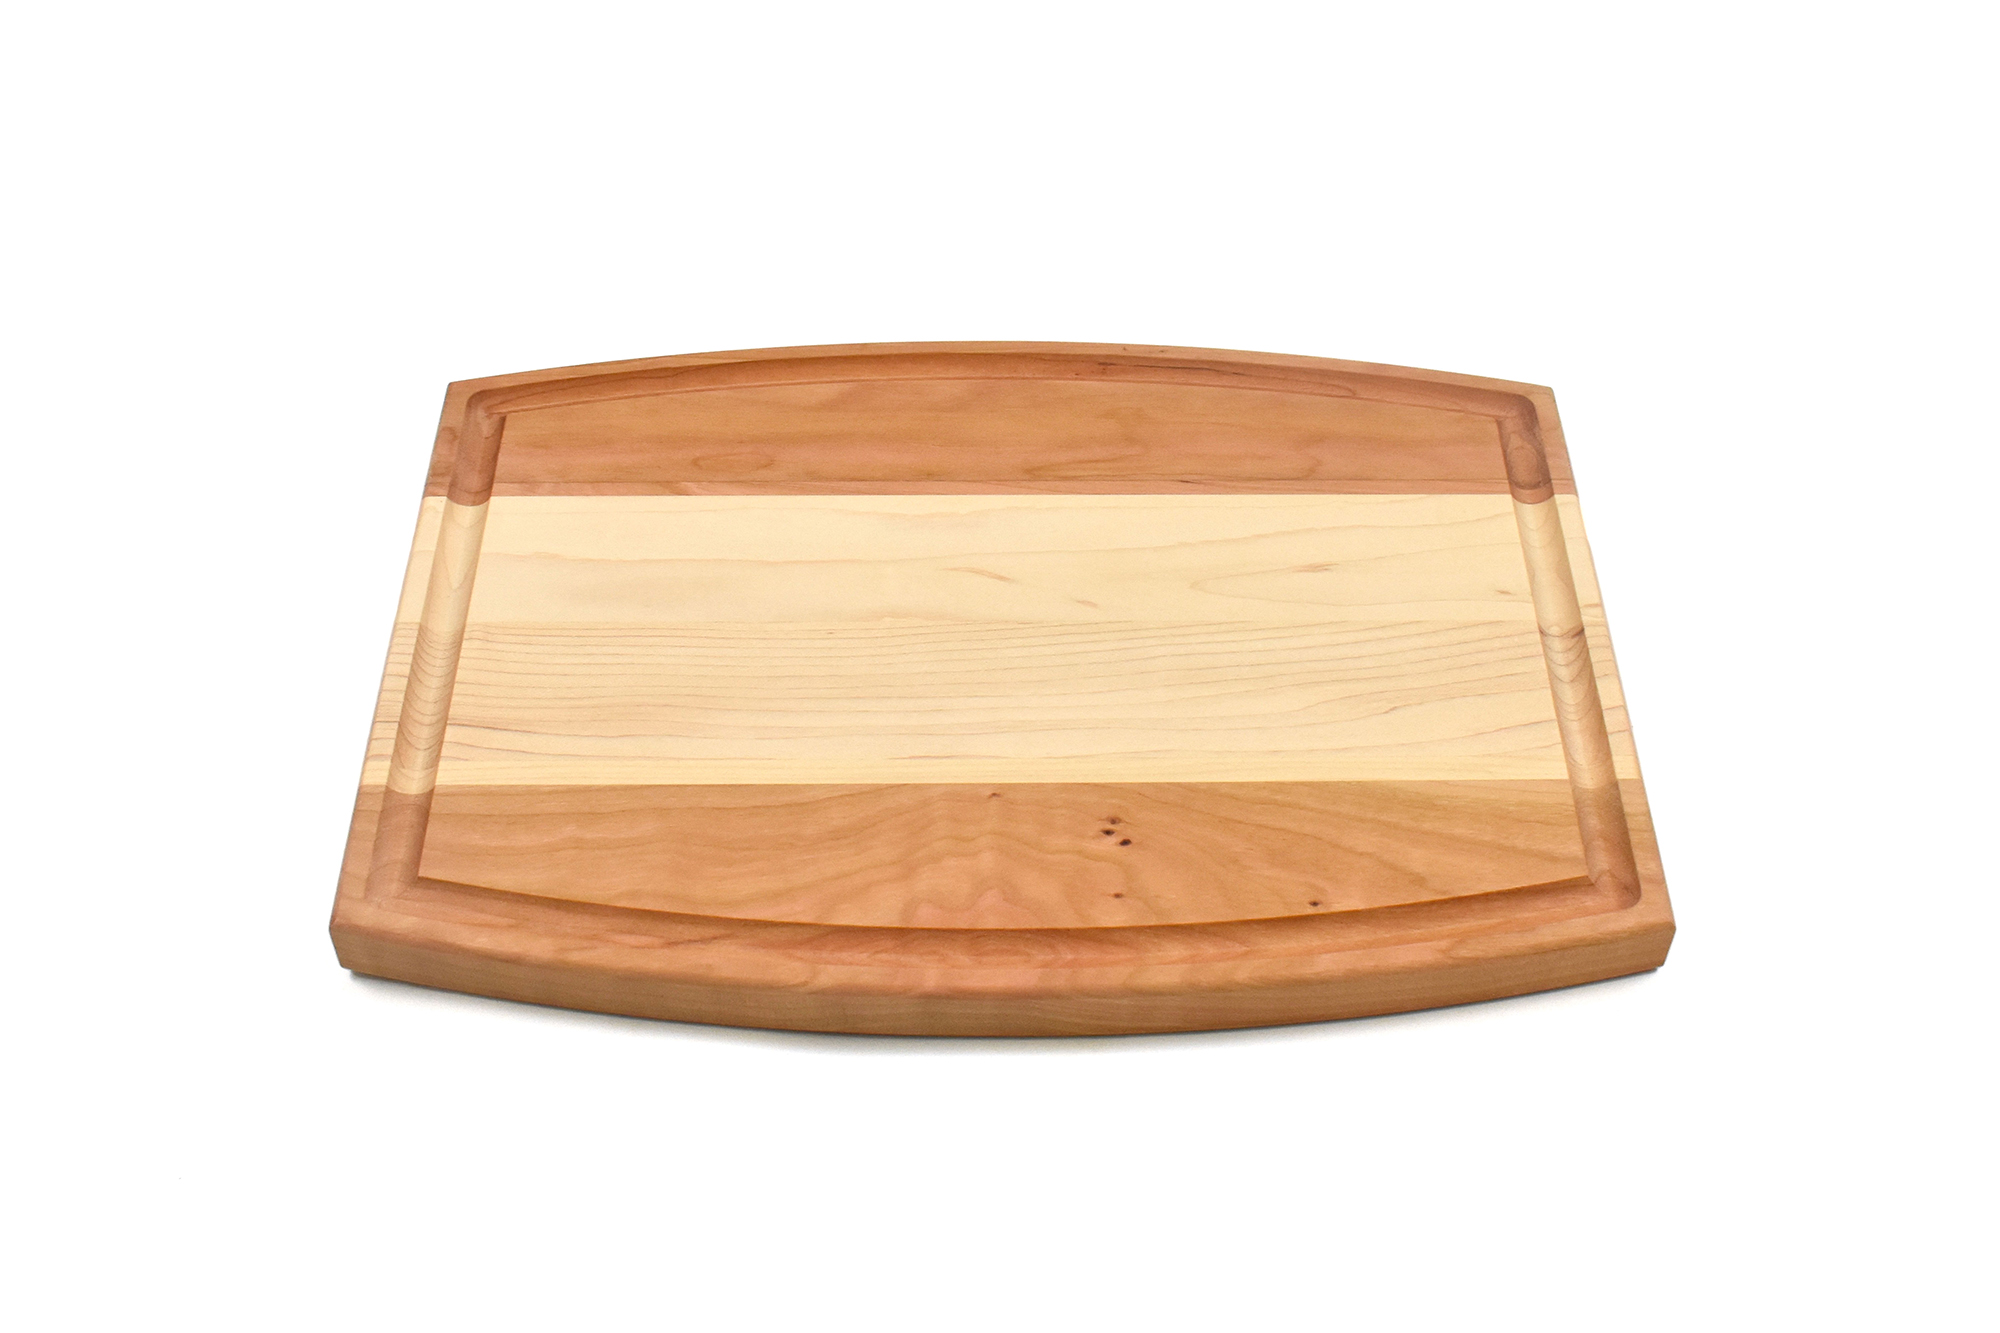 Arched Multi wood species cutting board with maple in the middle